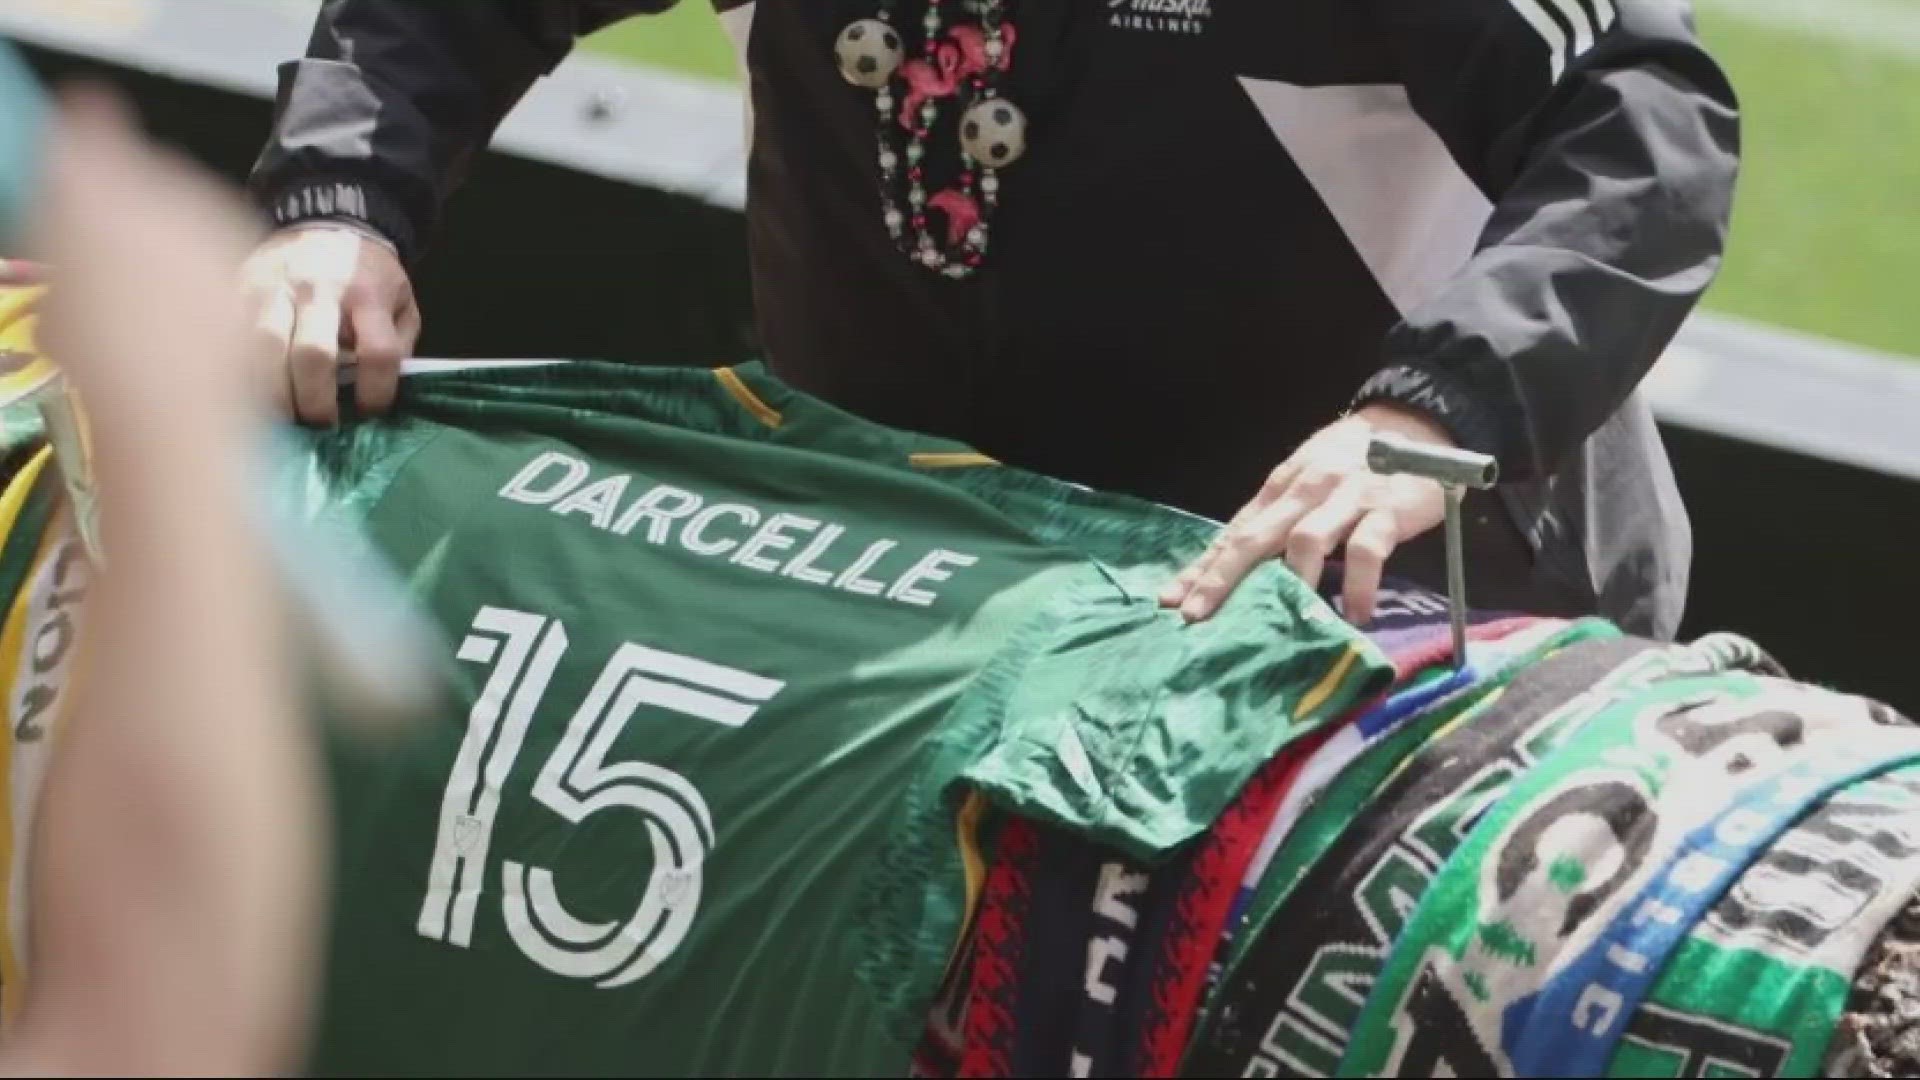 The team debuted a customized jersey for the iconic Portland drag queen, who died this week at age 92.